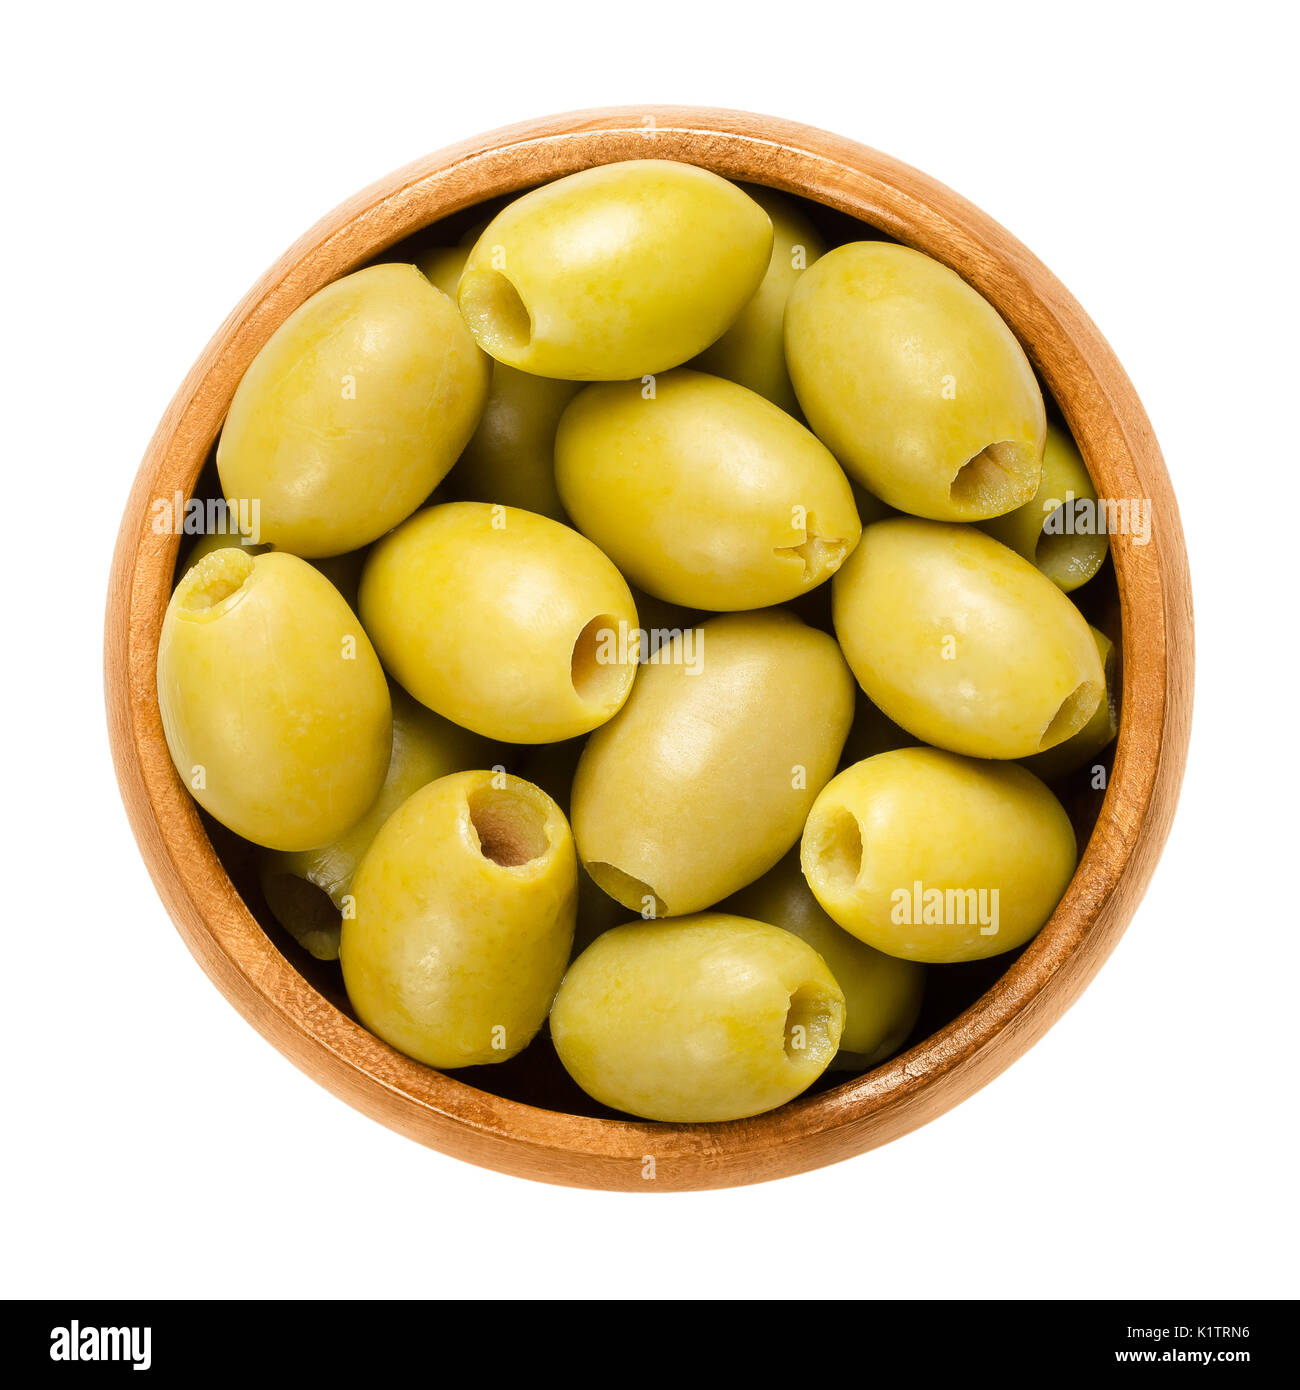 Pitted and marinated green olives in wooden bowl. Fruits of the European olive, Olea europaea. Unripe table olives with yellow to green color. Stock Photo